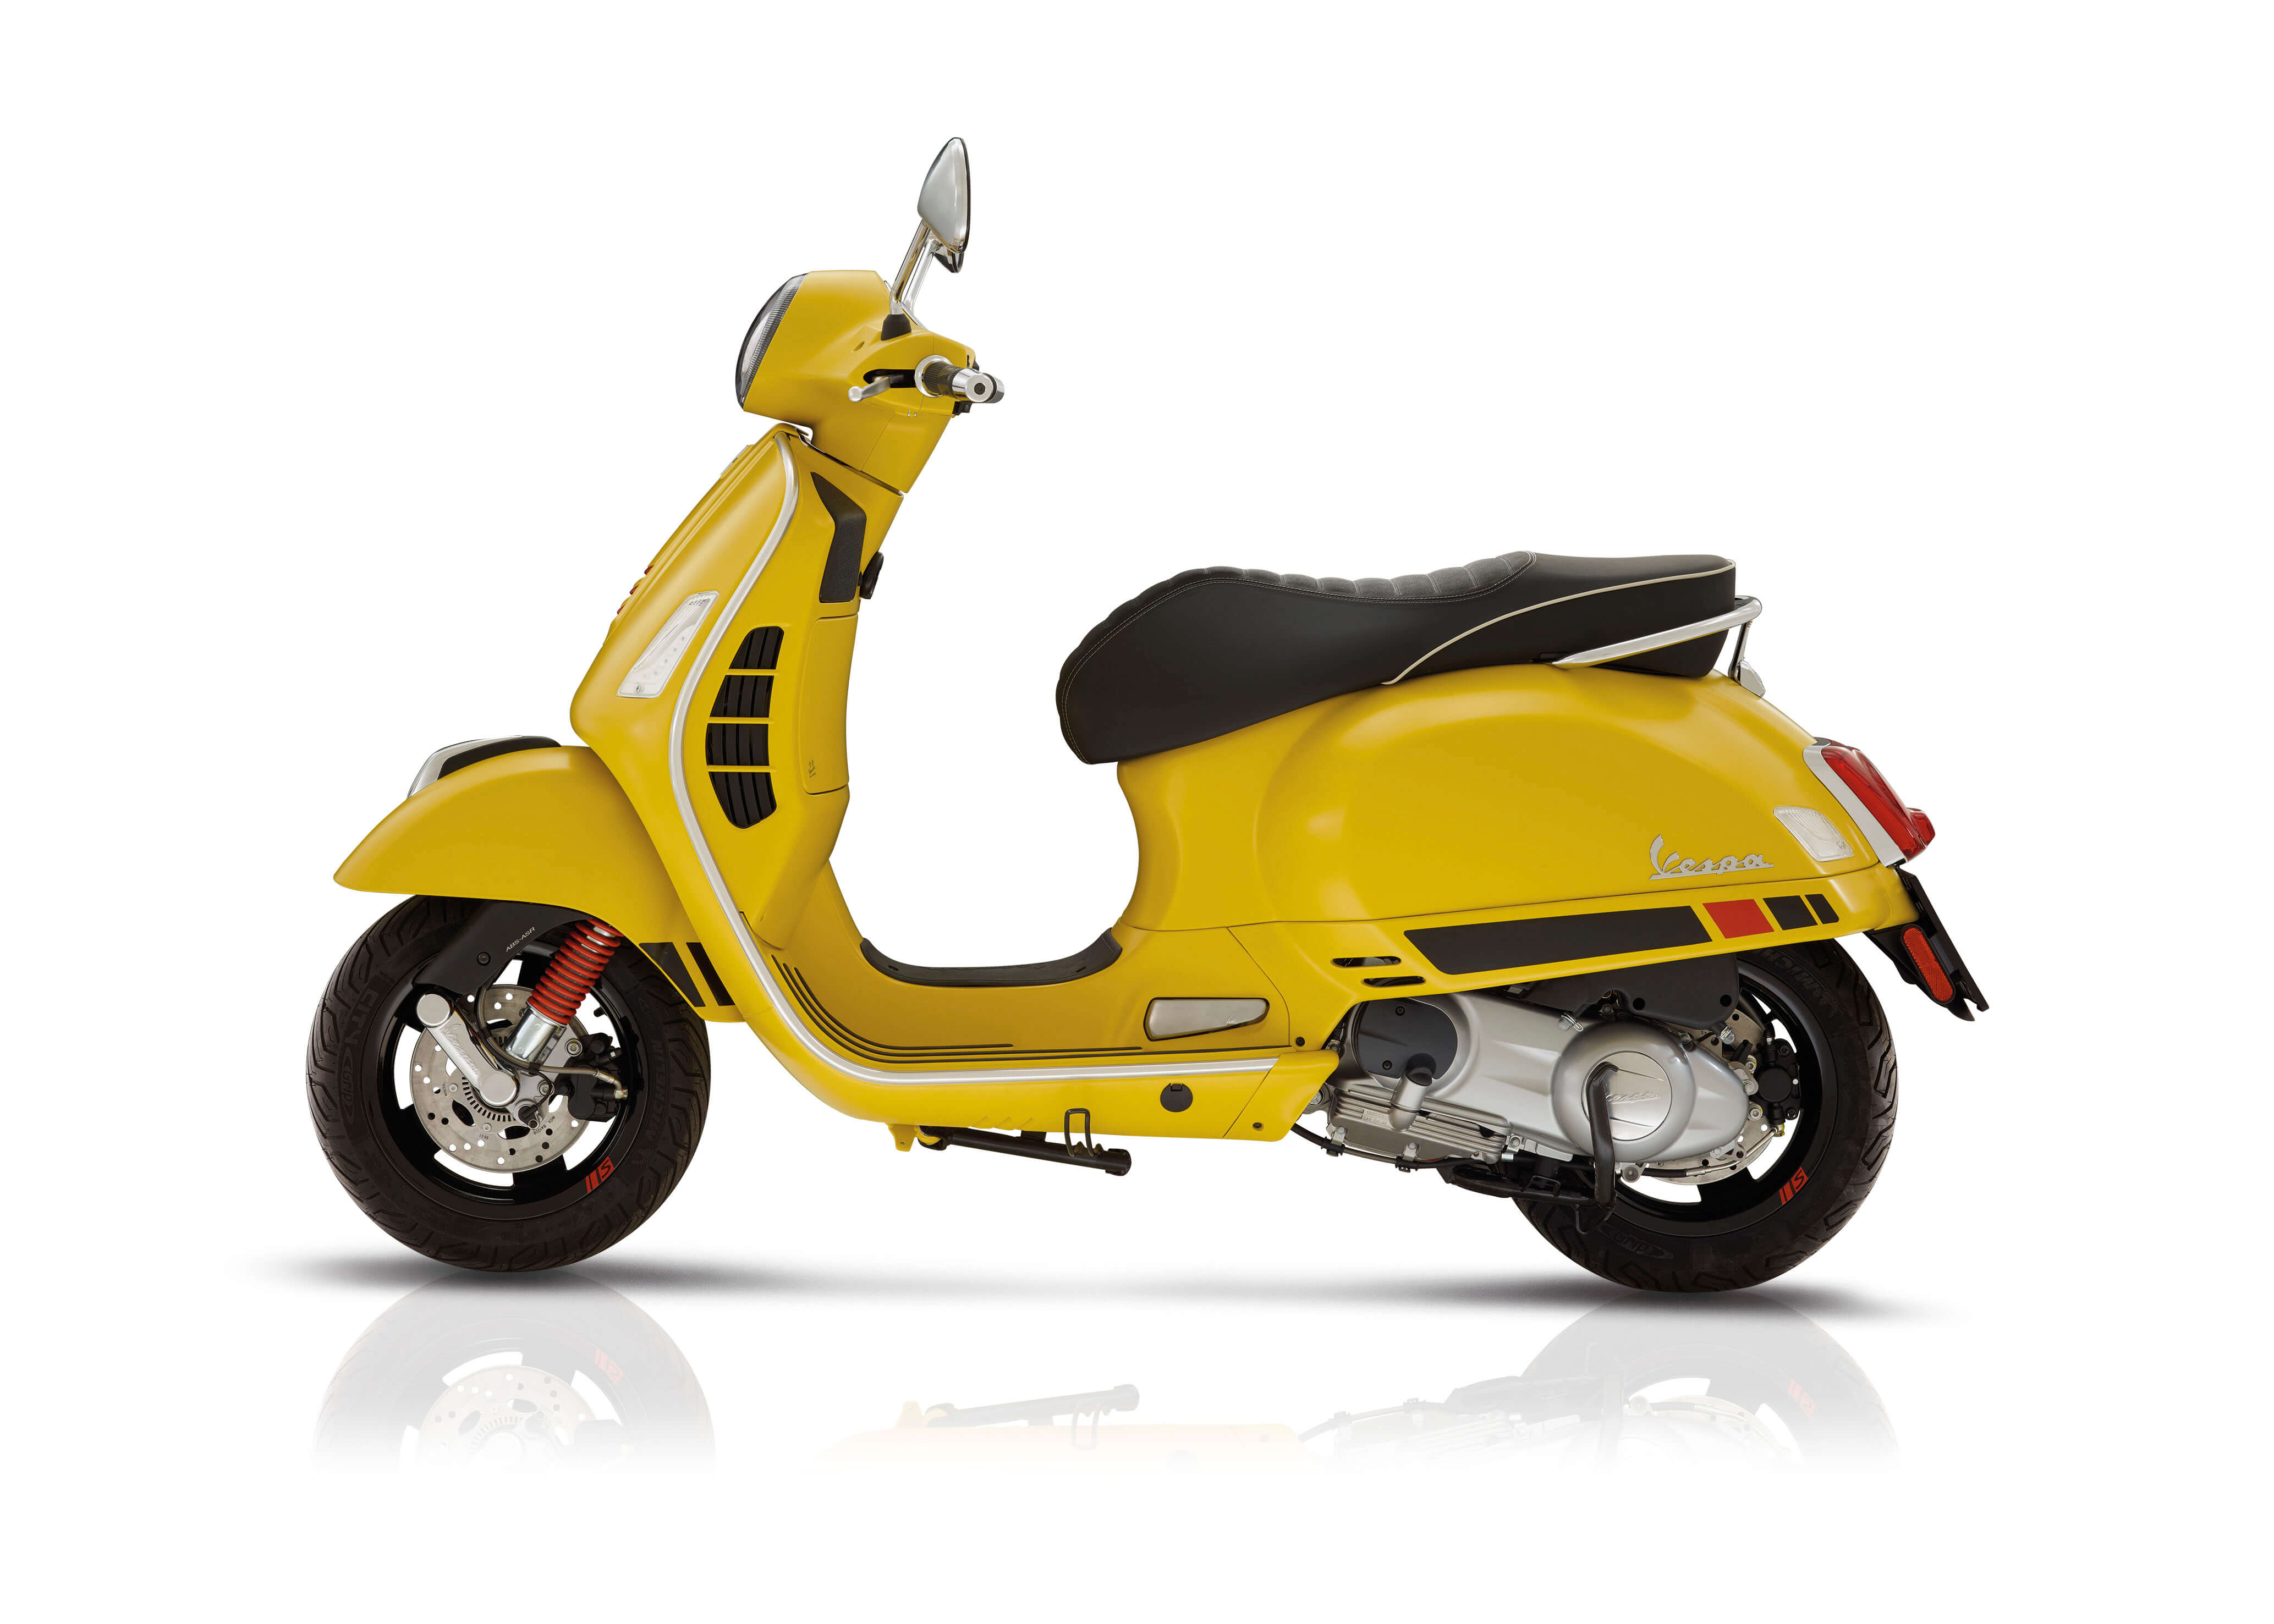 News - Scooter Style / Noosa Motorcycles